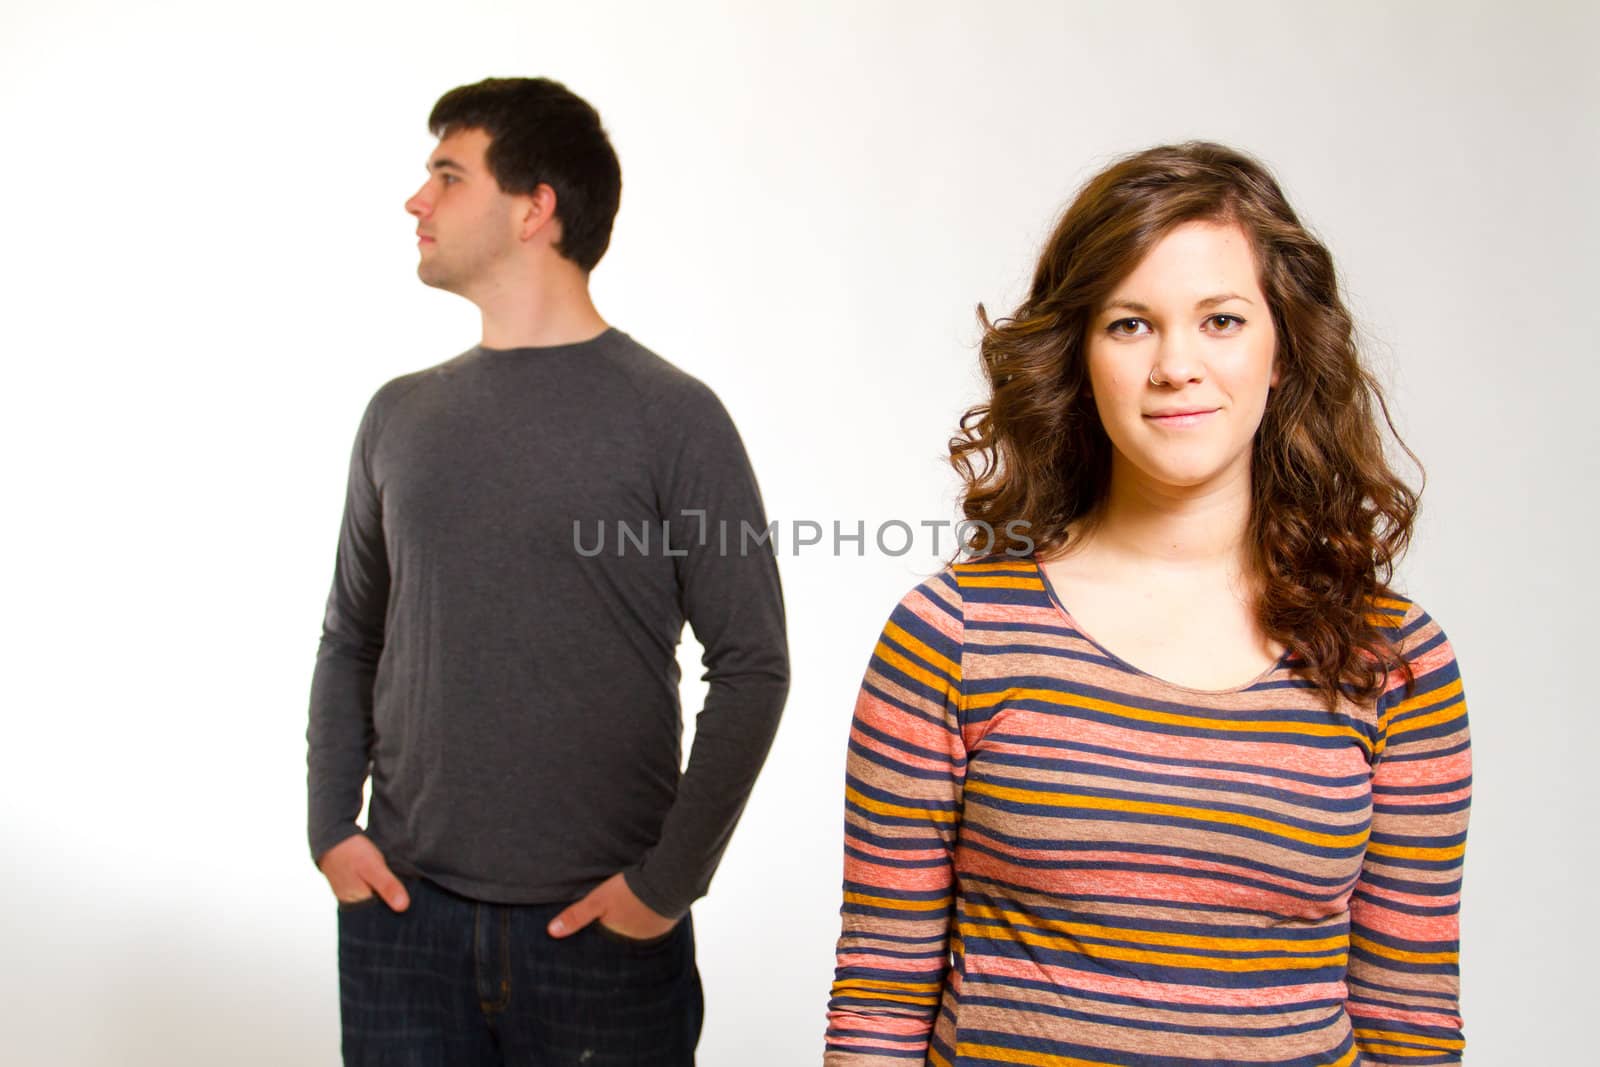 A man and a woman in a studio against an isolated white background for this simple portrait.